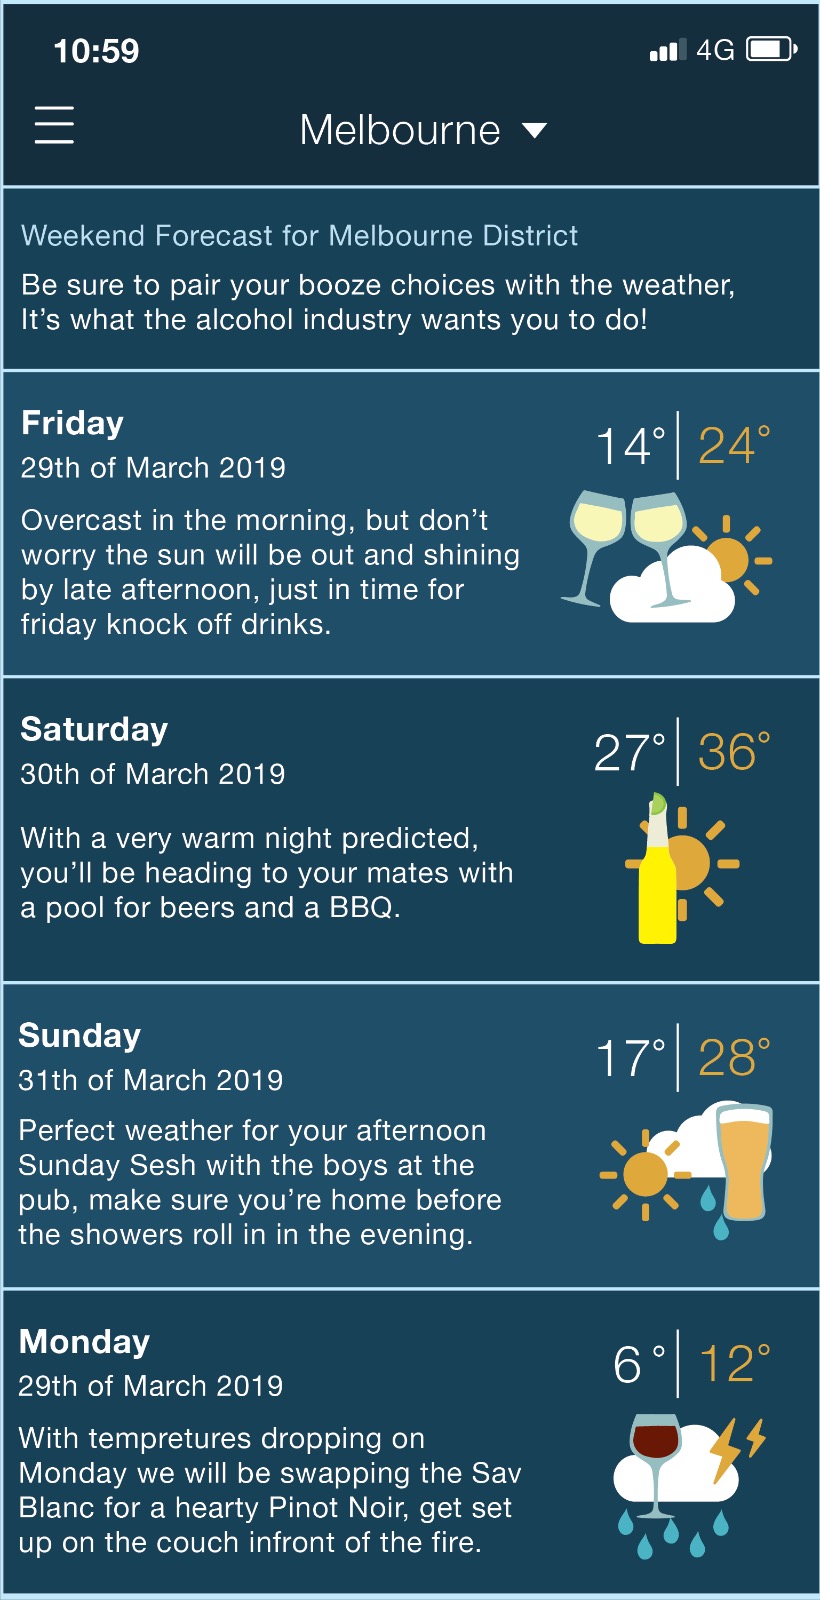 A poster designed by a young person for VicHealth's Top Spin competition. It shows a screenshot of a weather app where each day prompts you to drink alcohol. Headline: "Be sure to pair your booze choices with the weather. It's what the alcohol industry wants you to do!"